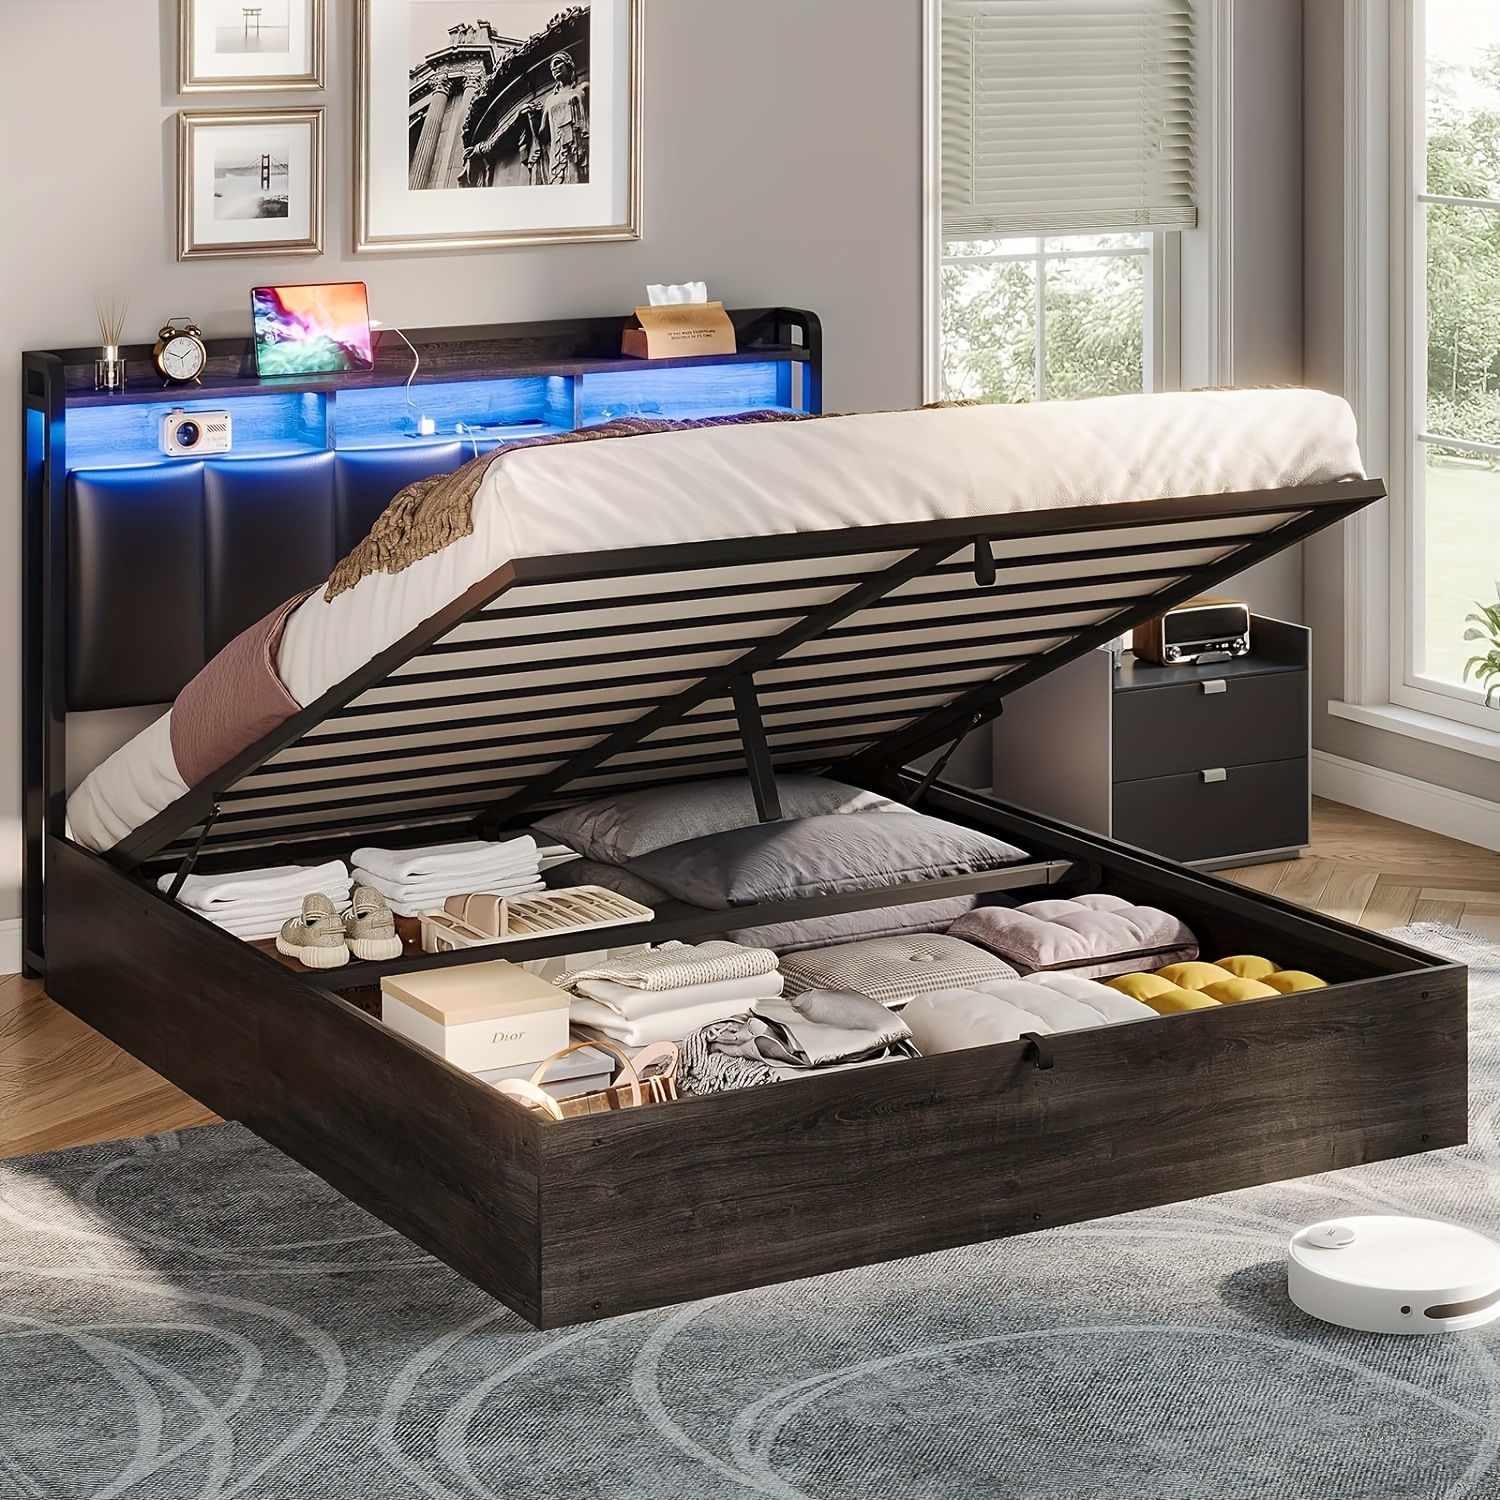 

Queen Size Lift Up Storage Bed Wood Platform Bed Frame With Storage Headboard